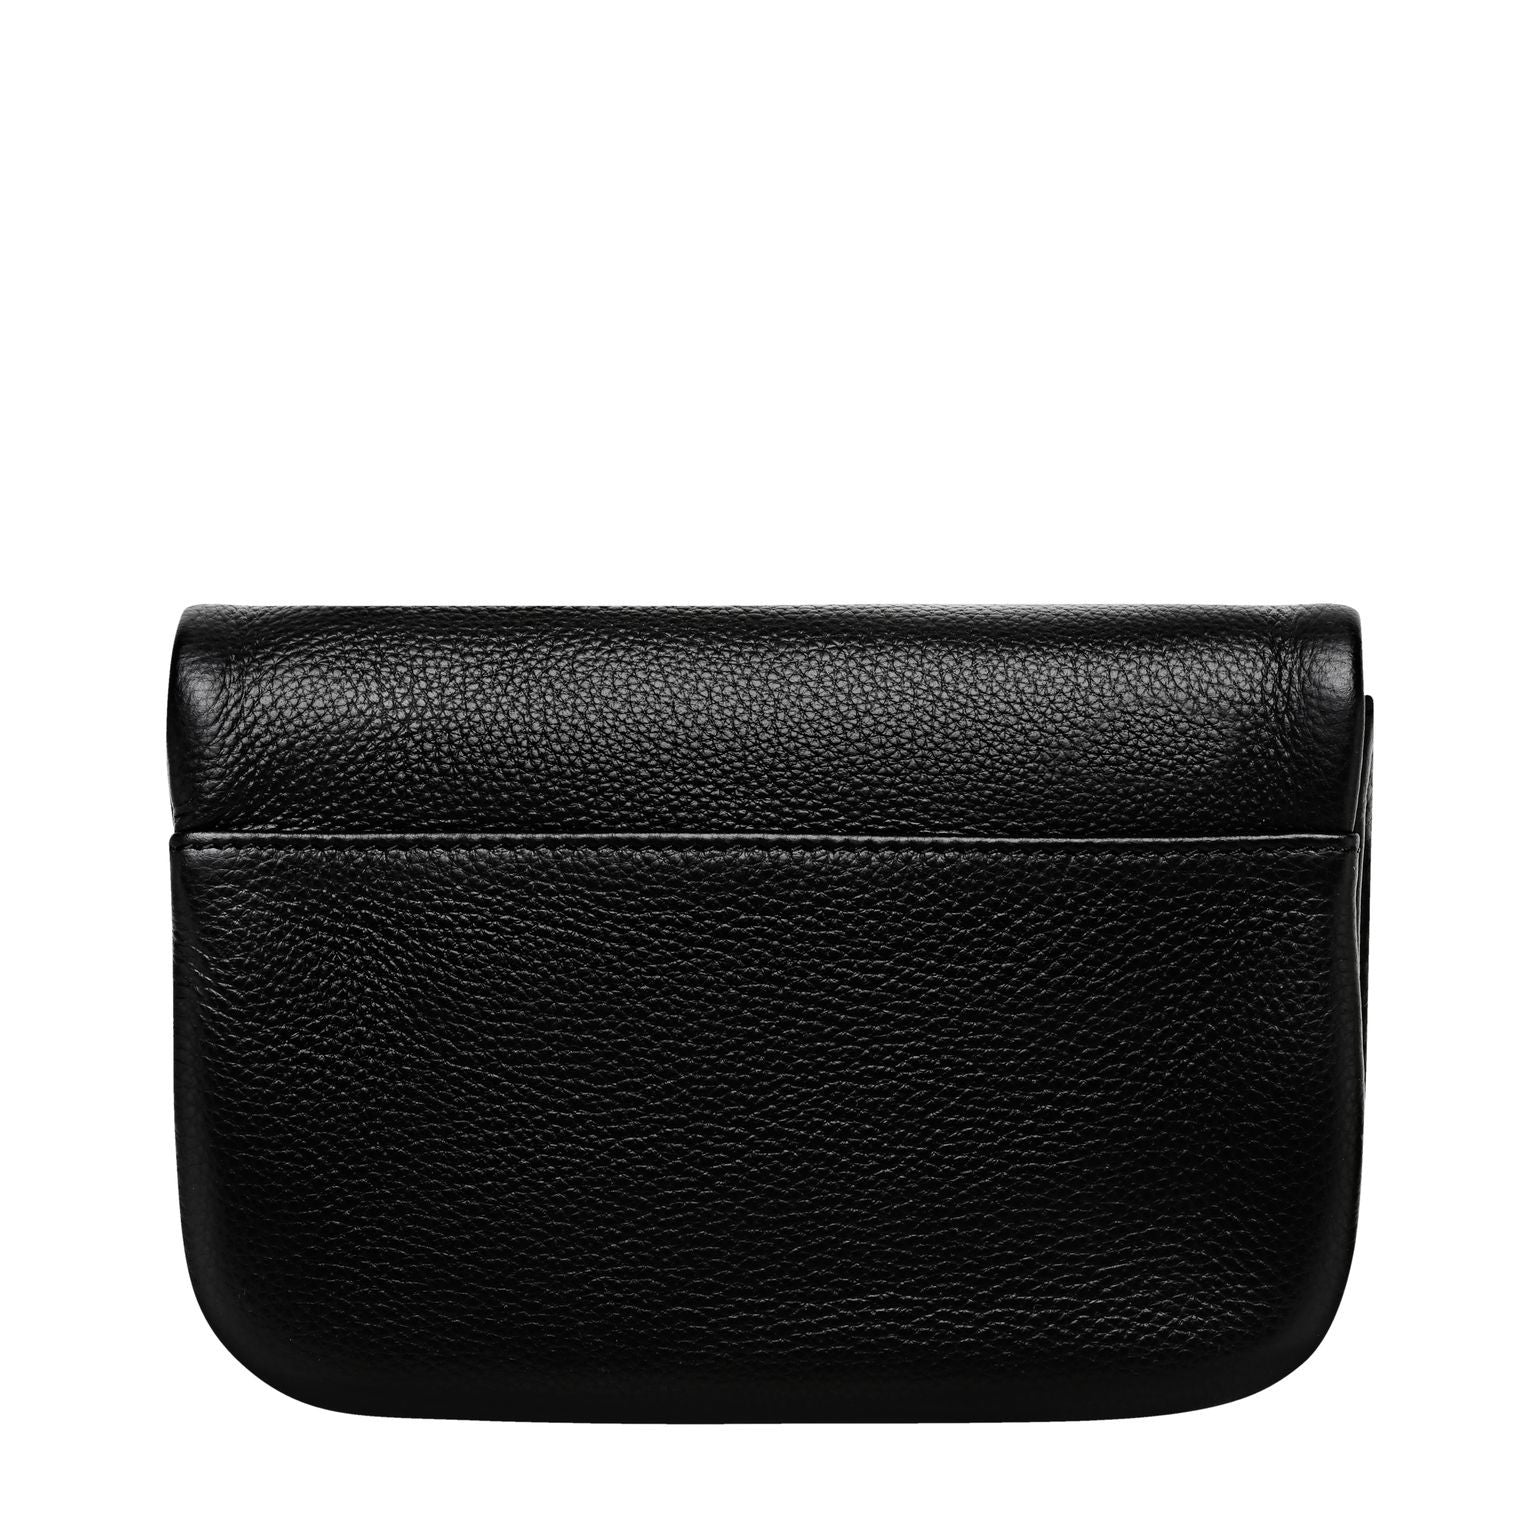 Status Anxiety Impermanent Wallet [COLOUR:Black]